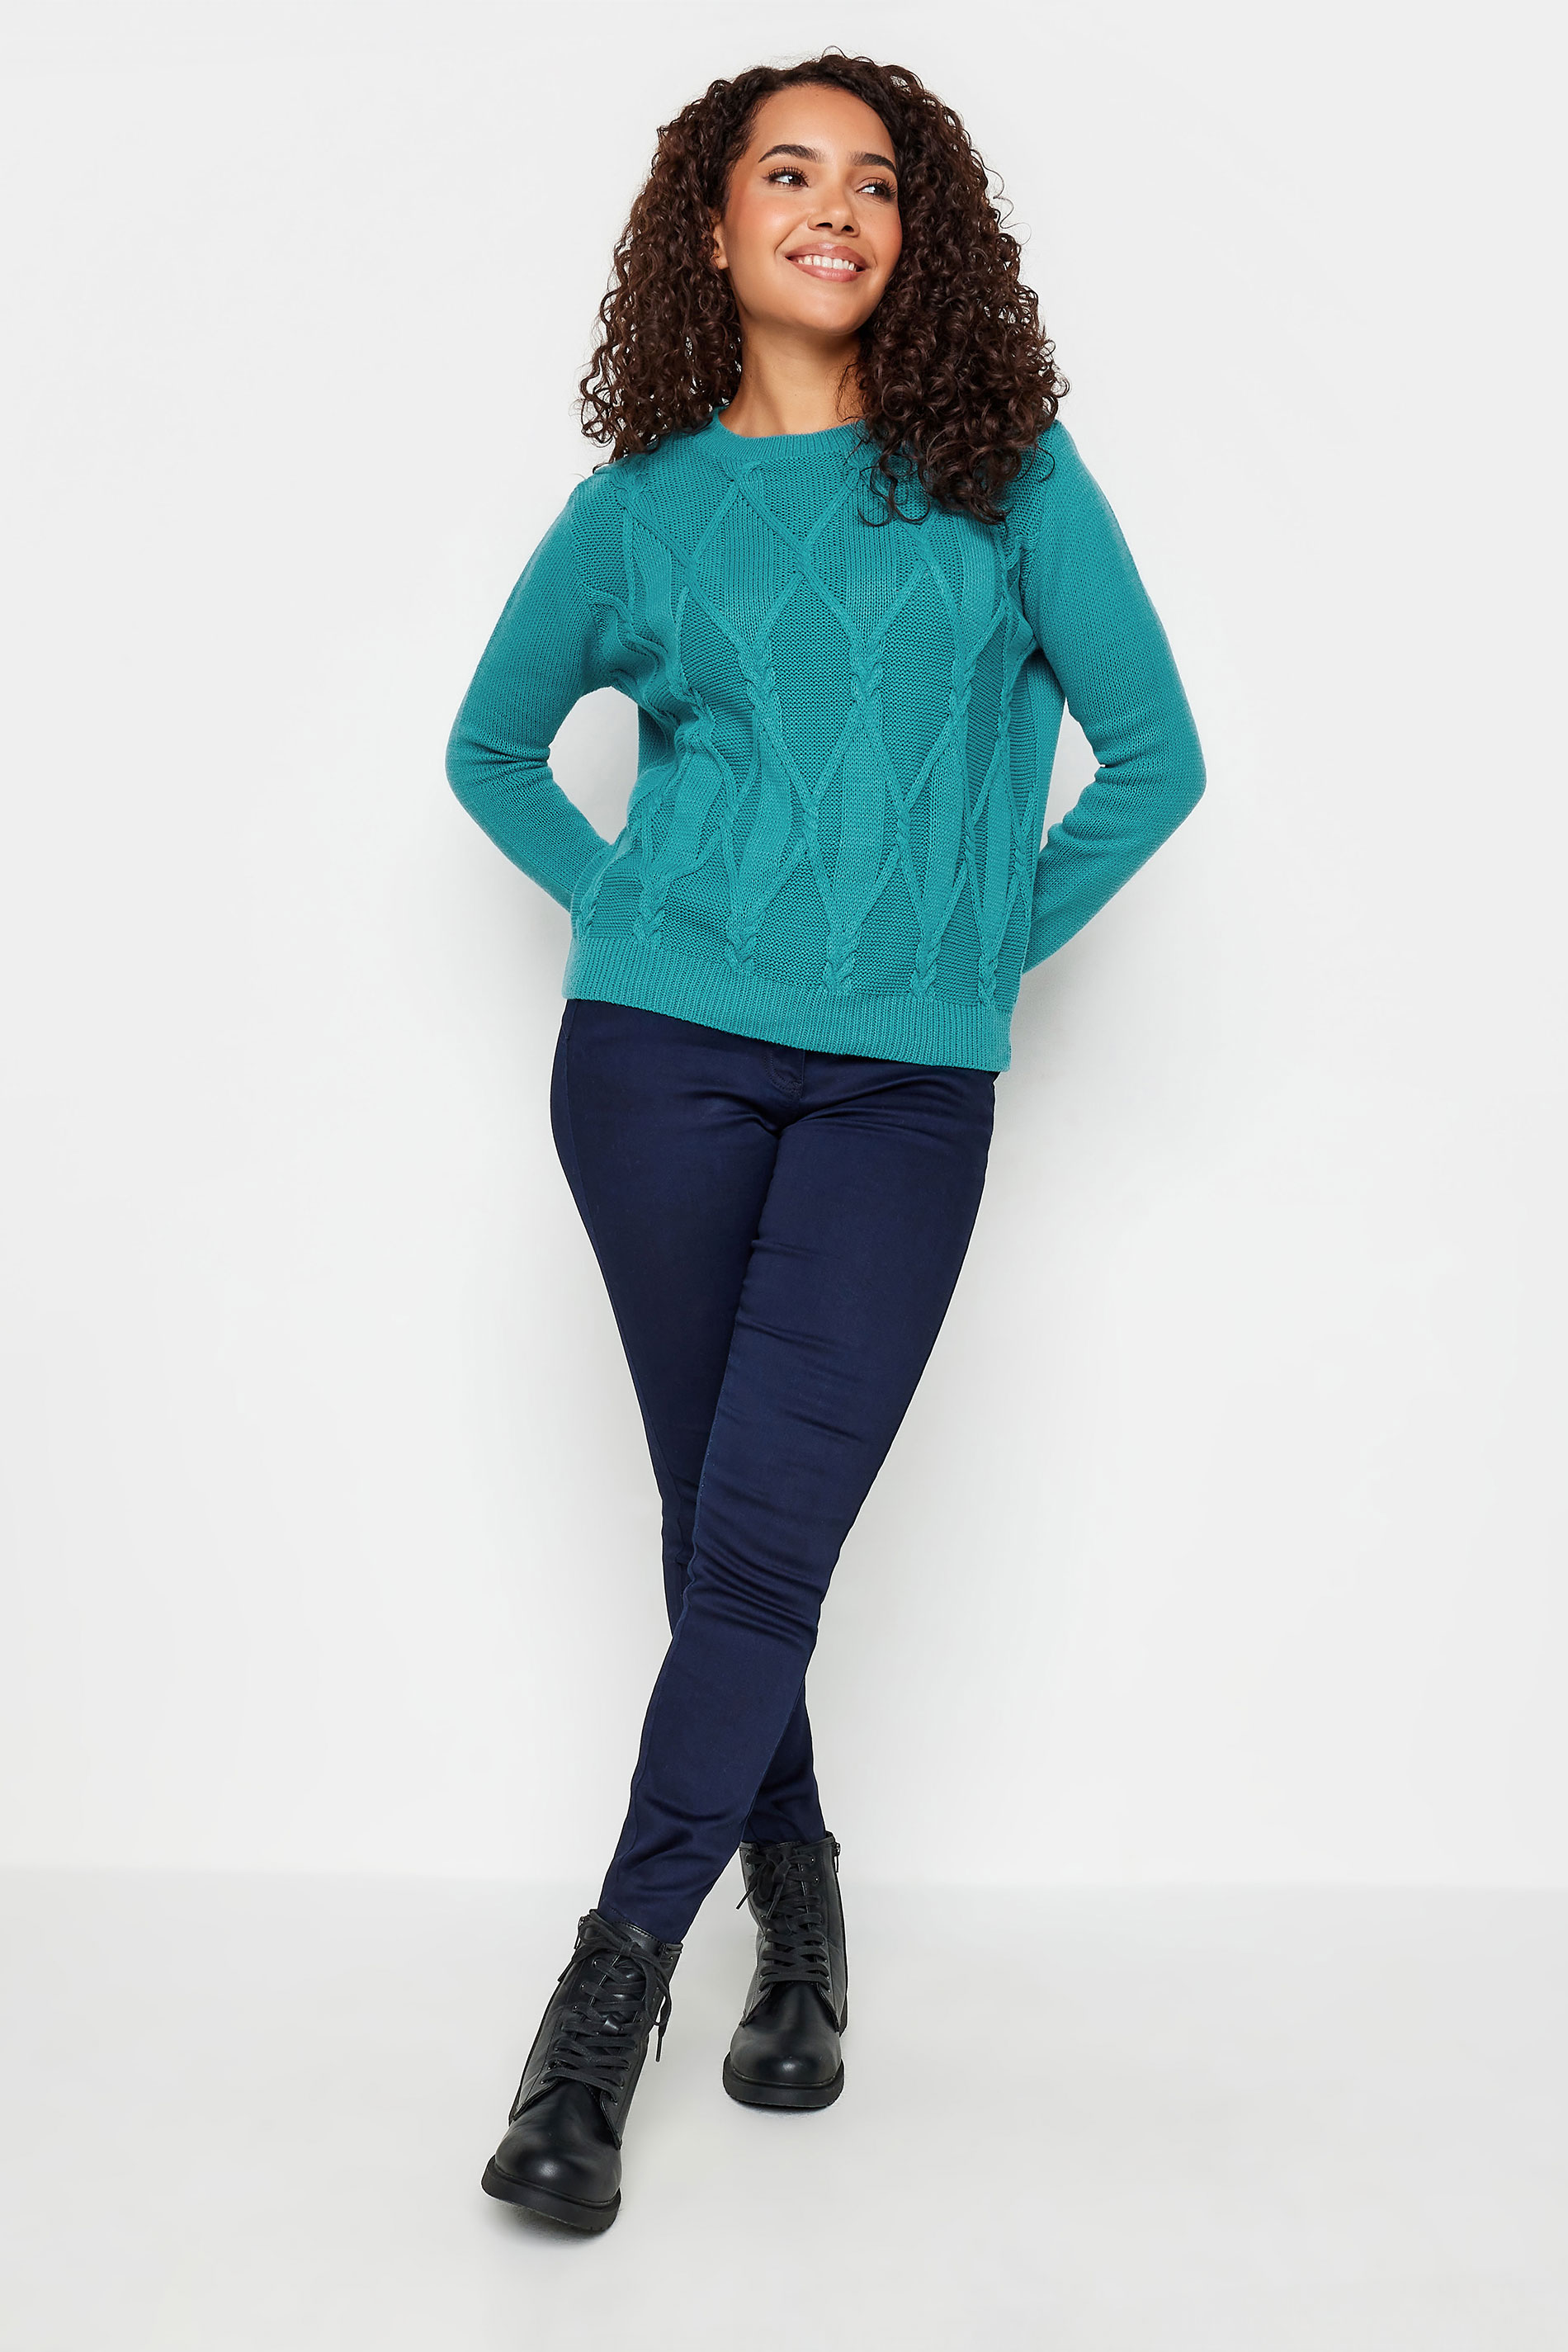 M&Co Teal Blue Cable Knit Jumper | M&Co 2